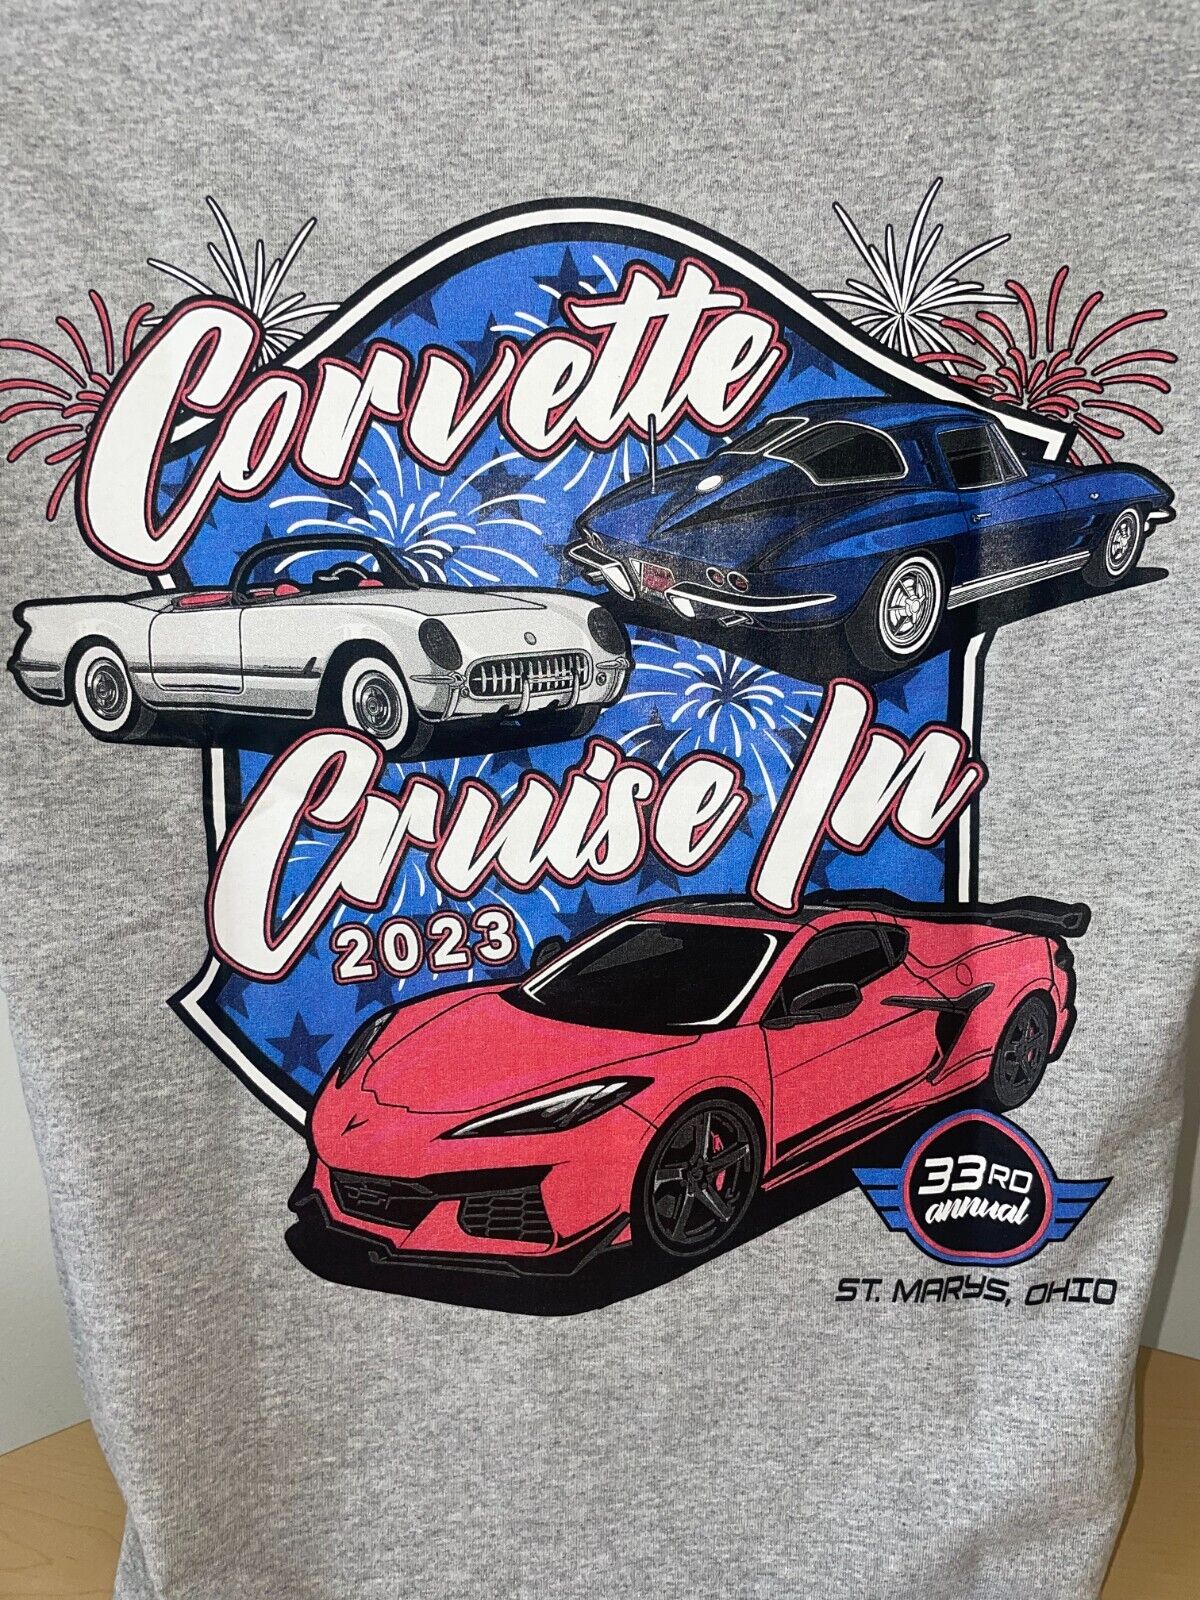 Buds Chevrolet 33rd Annual Corvette Cruise-In T-shirt